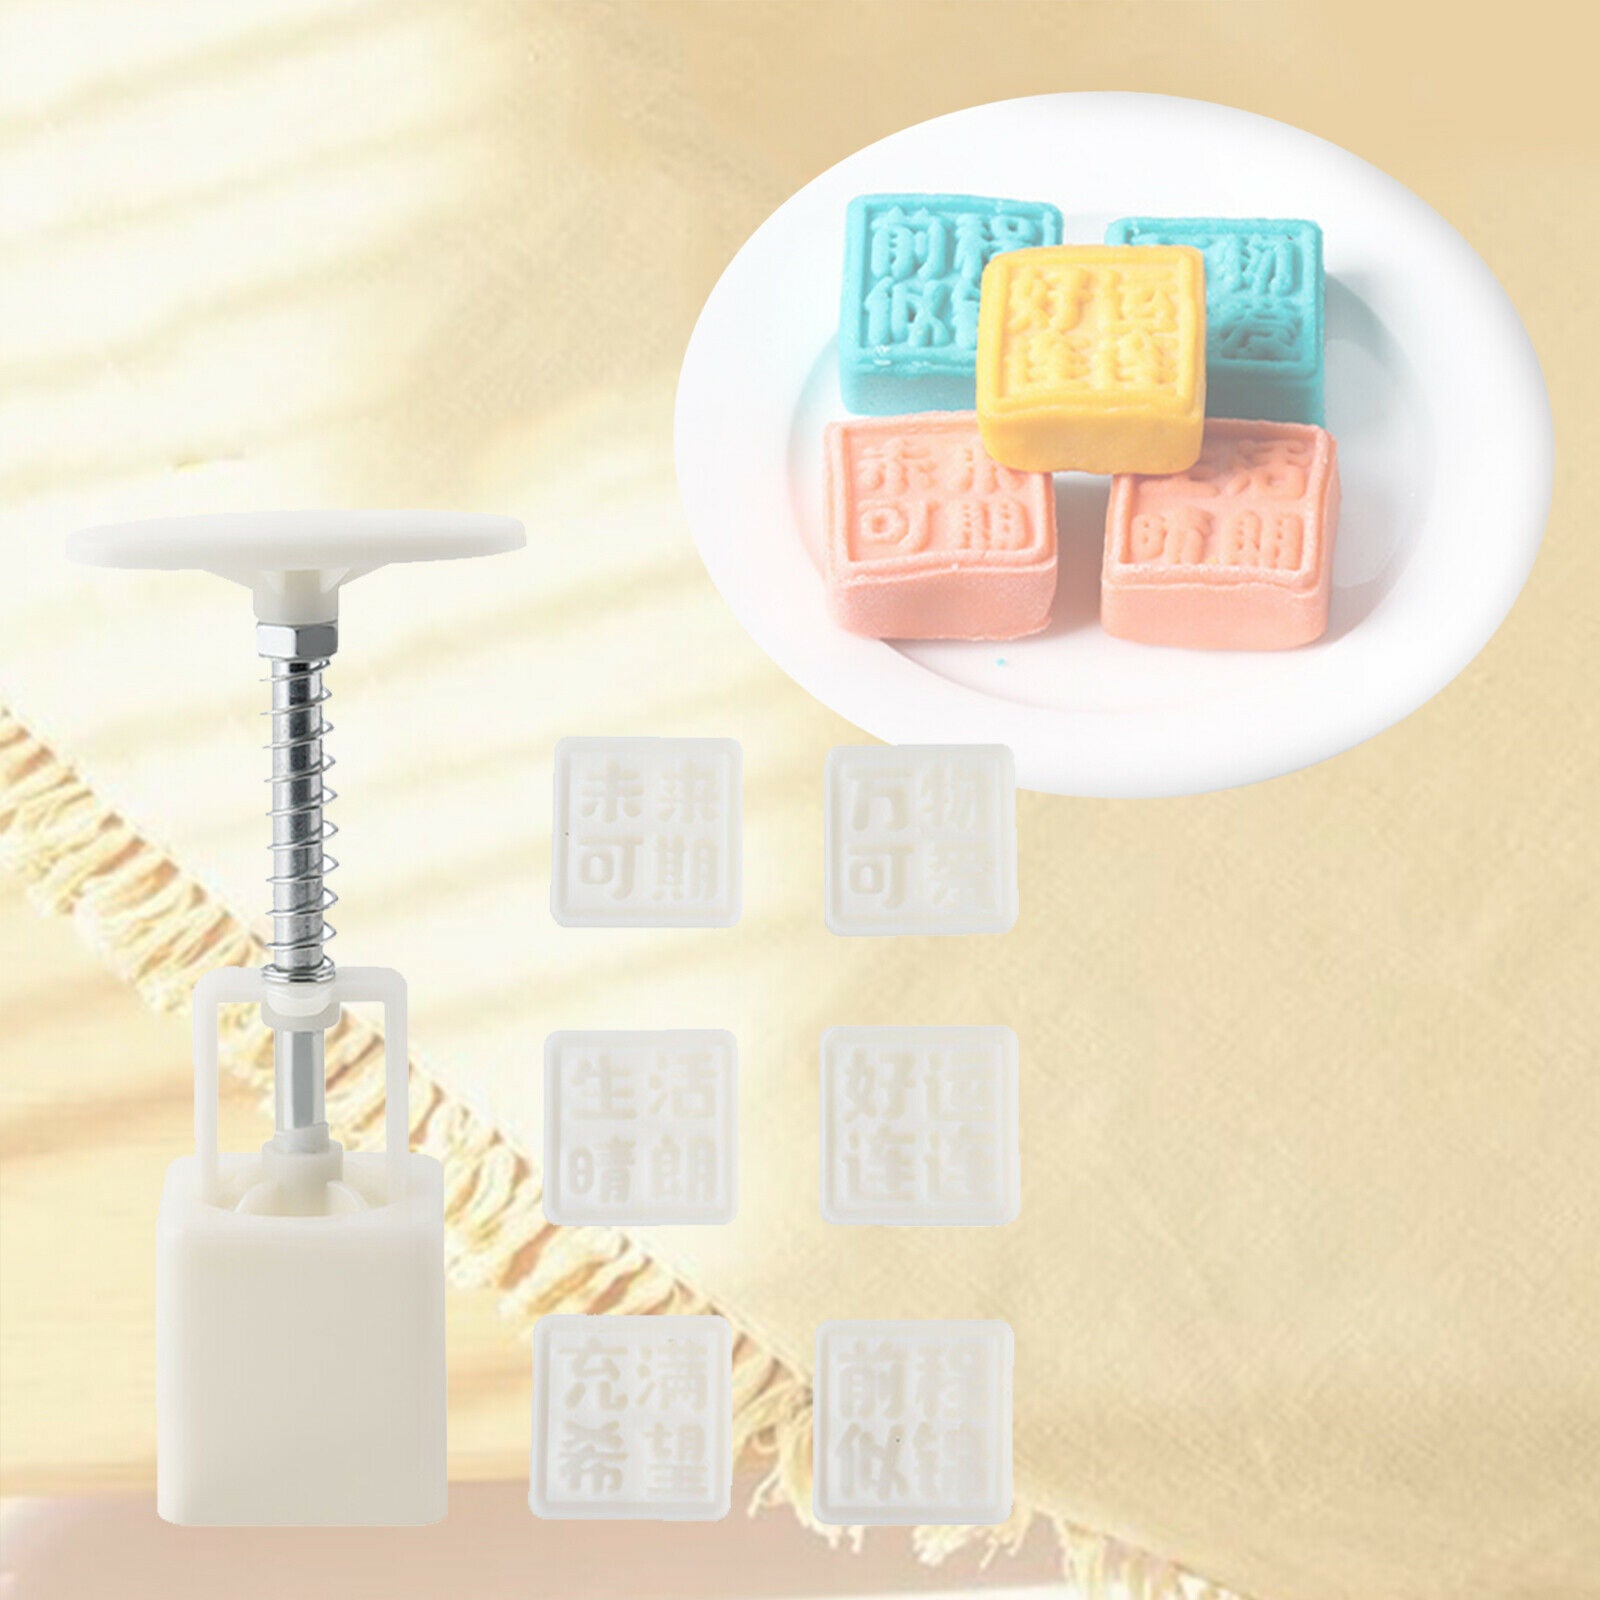 Hand-Pressure Moon Cake Mould Mid-Autumn Festival White for Baking Cookies